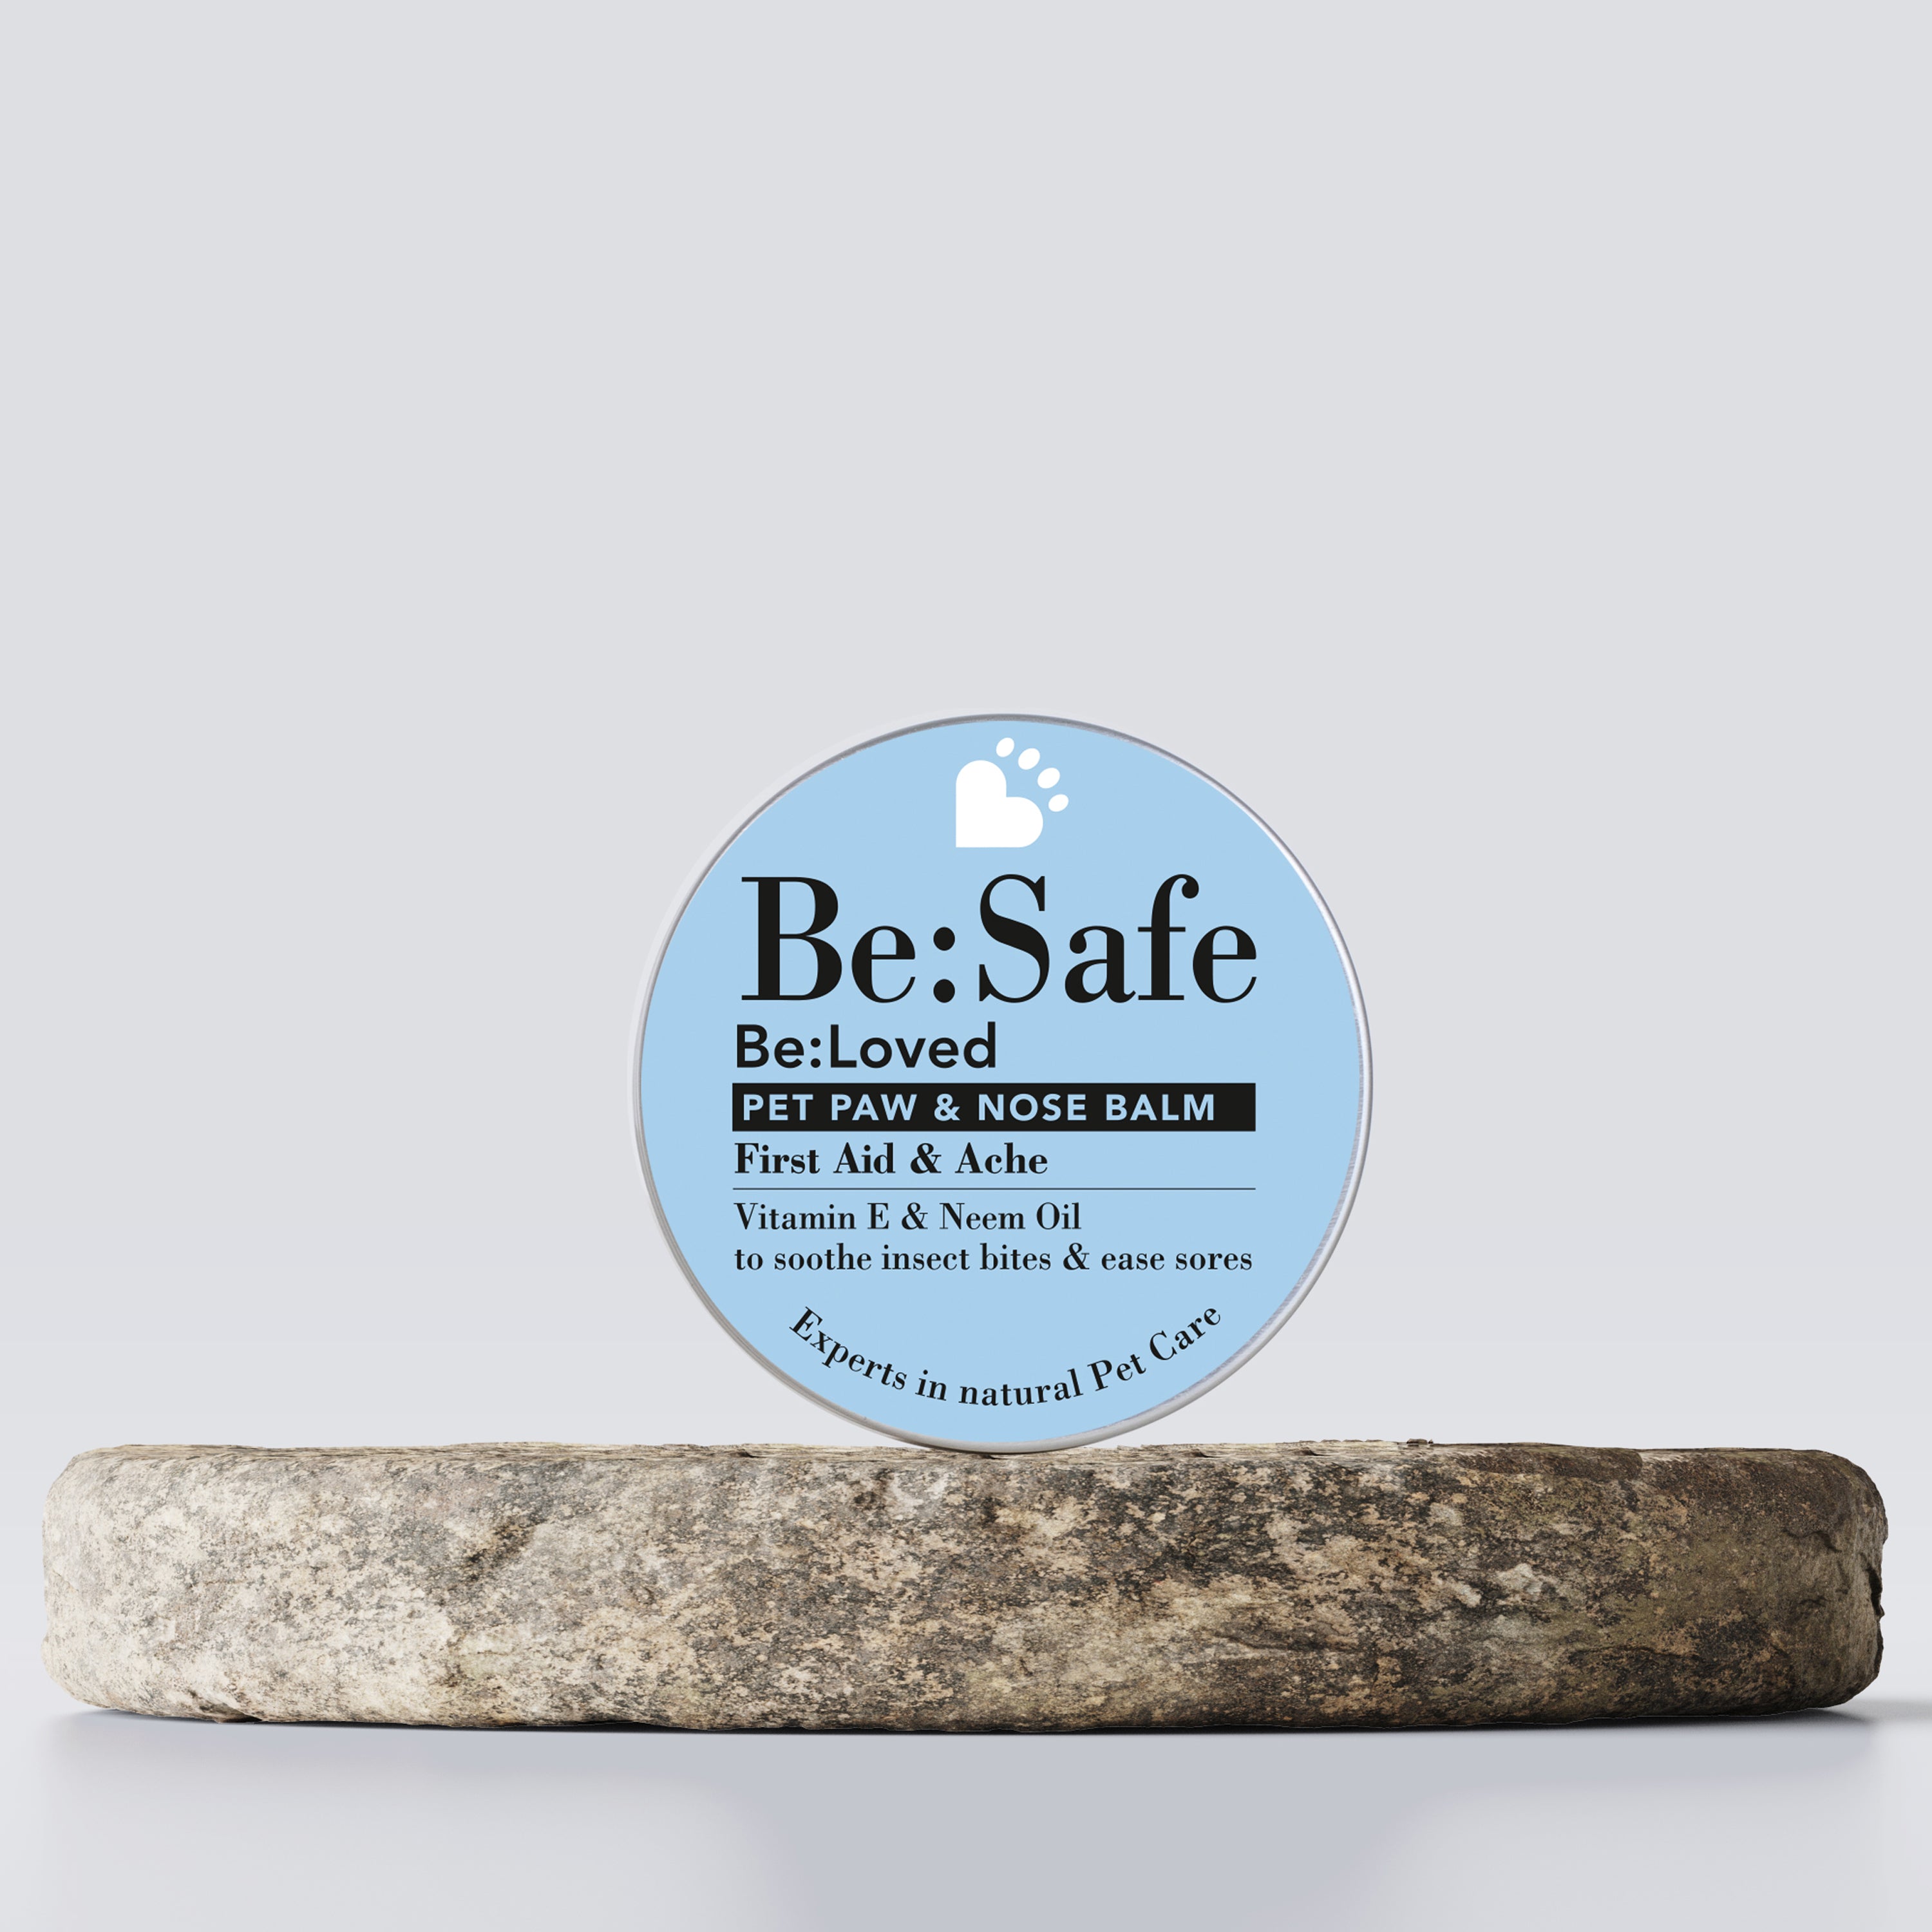 Be:safe pet paw and nose balm product on a wooden tray. 